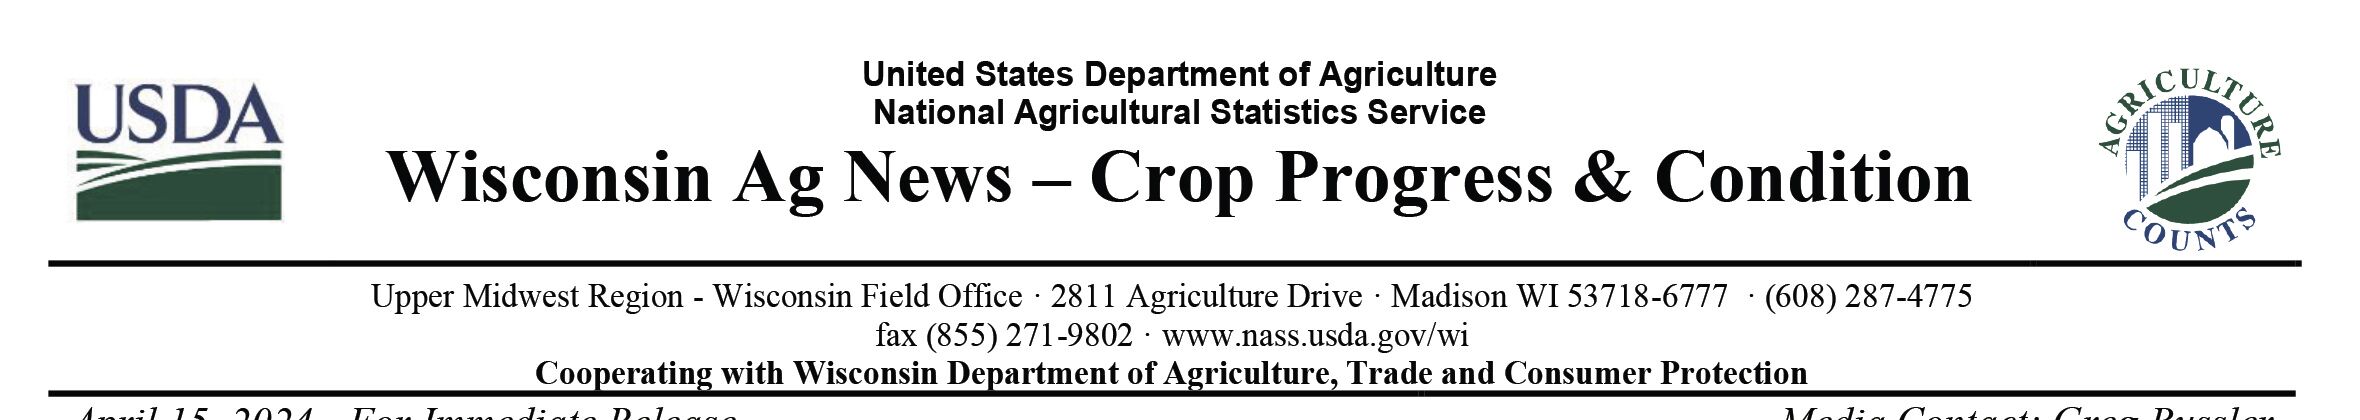 USDA NASS Wisconsin U.S. Department of Agriculture National Agricultural Statistics Service logo for Wisconsin